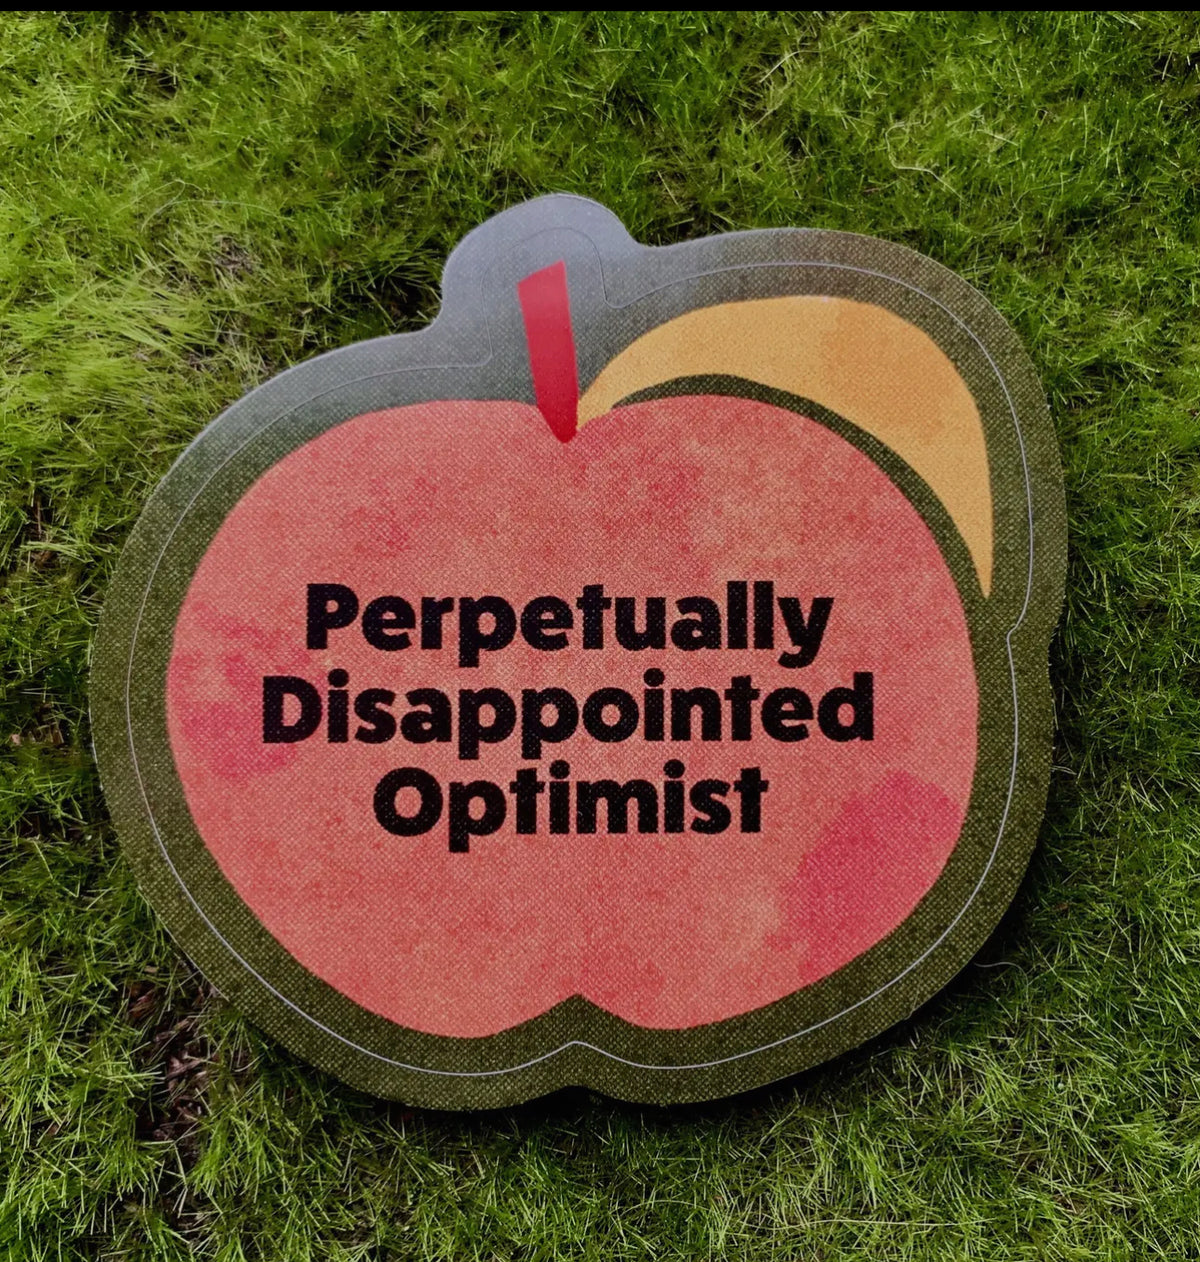 Perpetually Disappointed Optimist